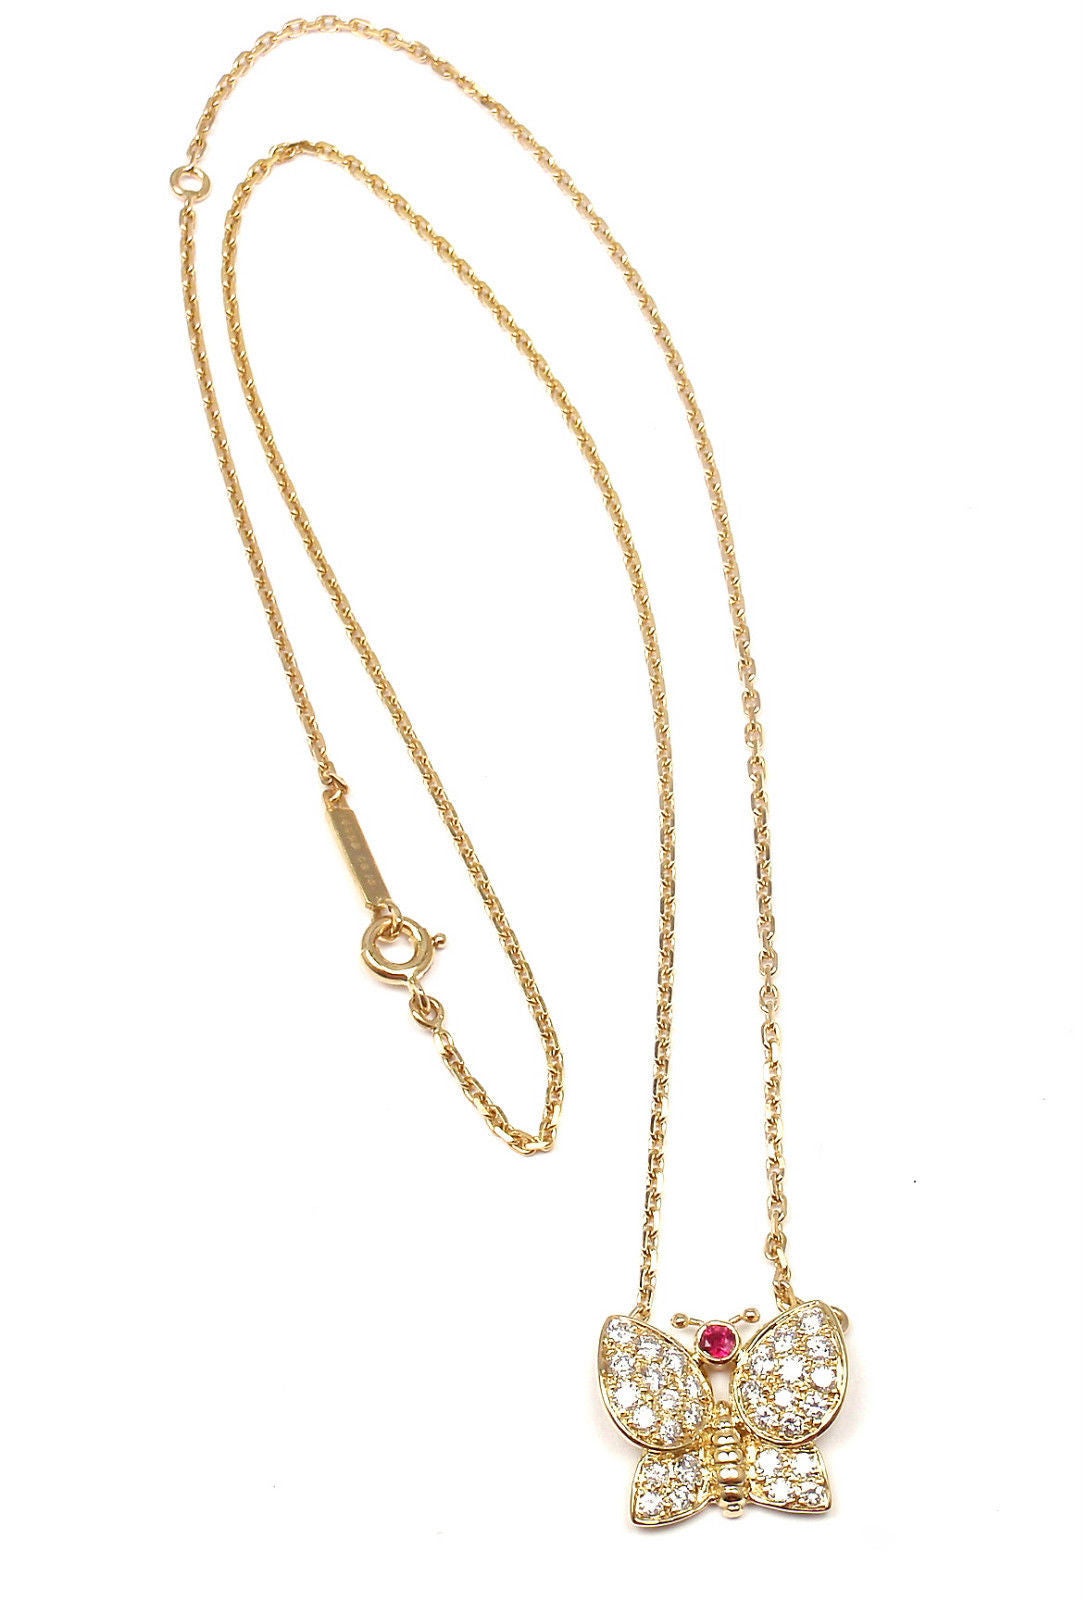 18k Yellow Gold Diamond Ruby Butterfly Necklace by Van Cleef & Arpels. 
With 30 brilliant round cut diamonds VVS1 clarity, F color
Total weight .70ct
1 ruby .10ct

Details: 
Length: 17''
Width: 2mm
Butterfly: 14mm x 16mm
Weight: 6.6